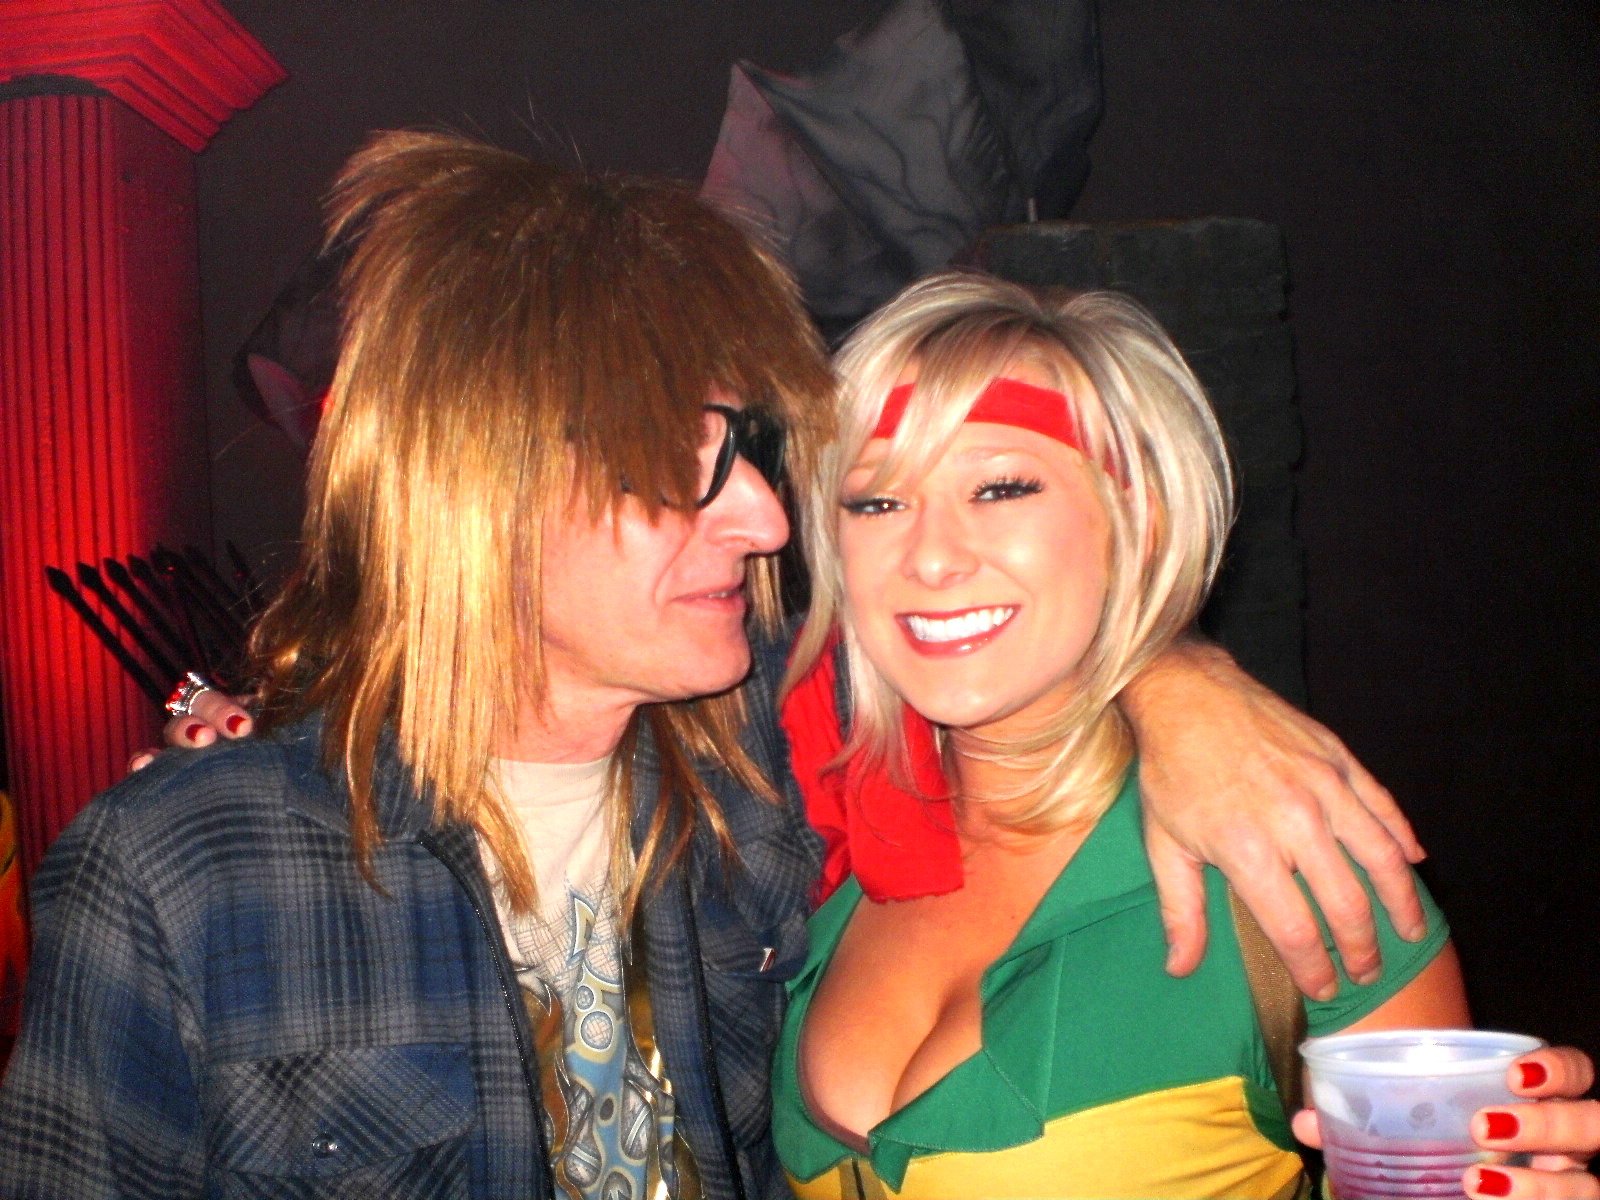 Joey with one of his fans at Stage 3 Productions annual Halloween party in Warren, MI